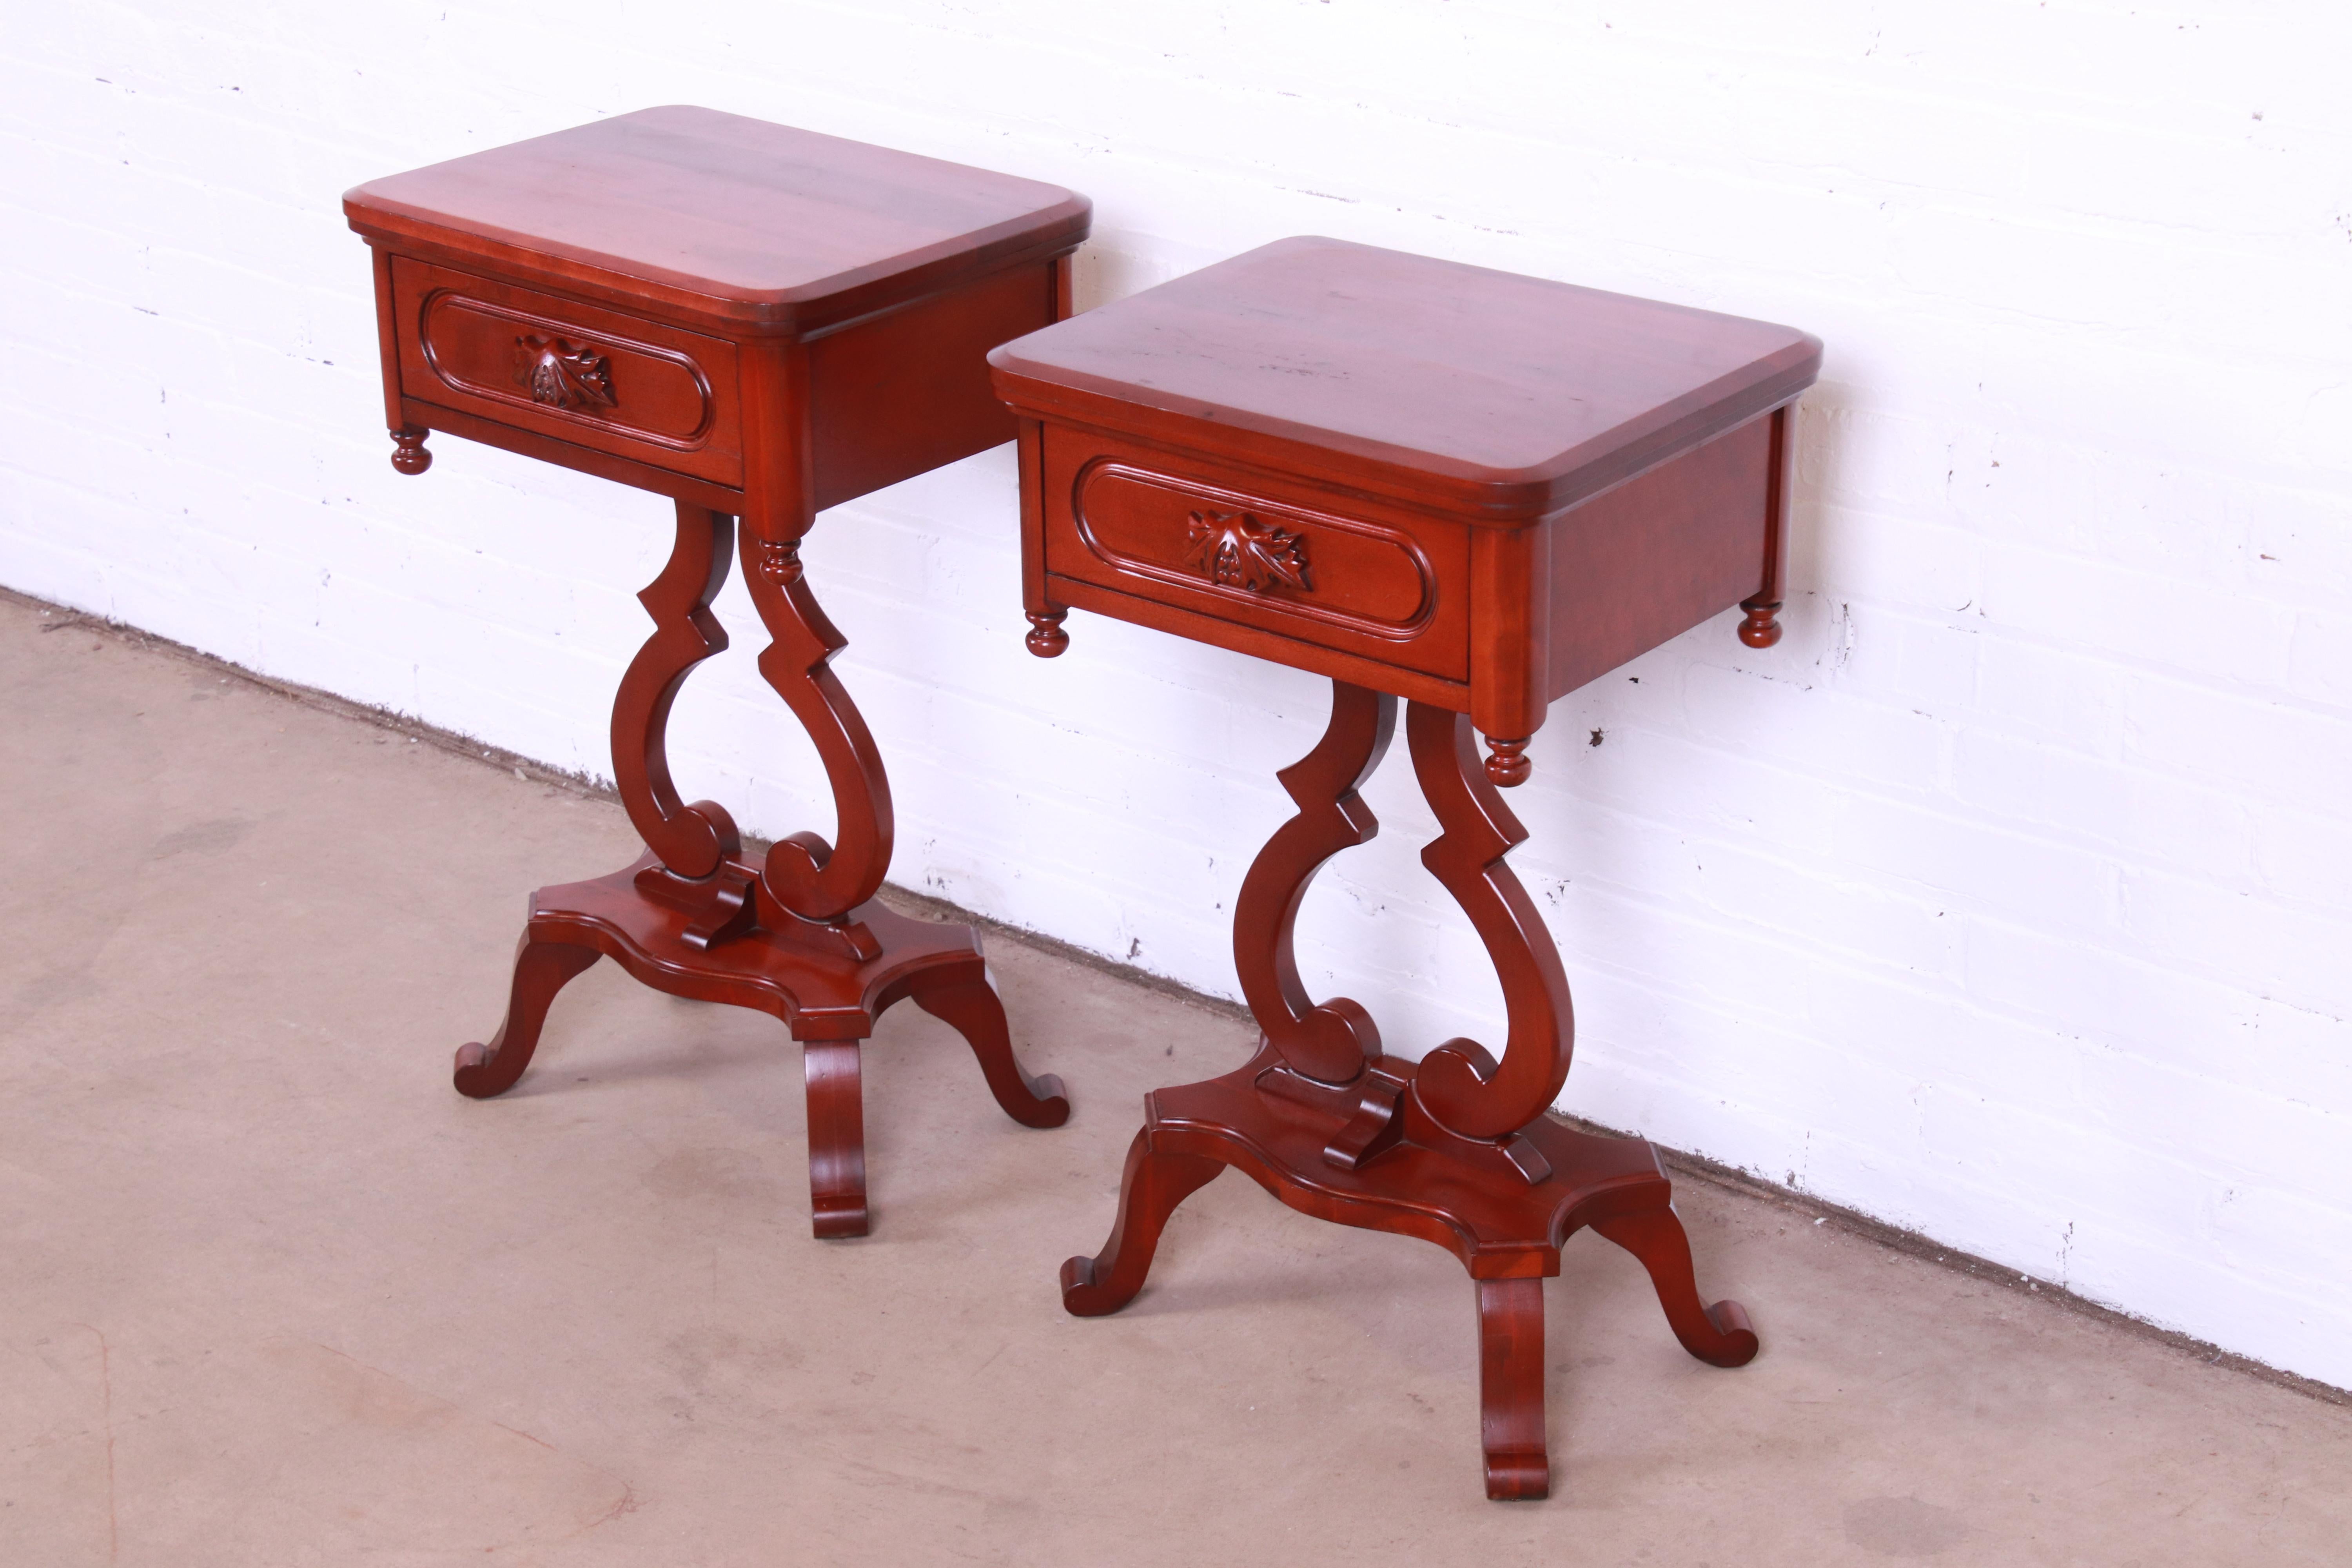 A gorgeous pair of Victorian style carved solid cherry wood nightstands

By Davis Cabinet Company, 